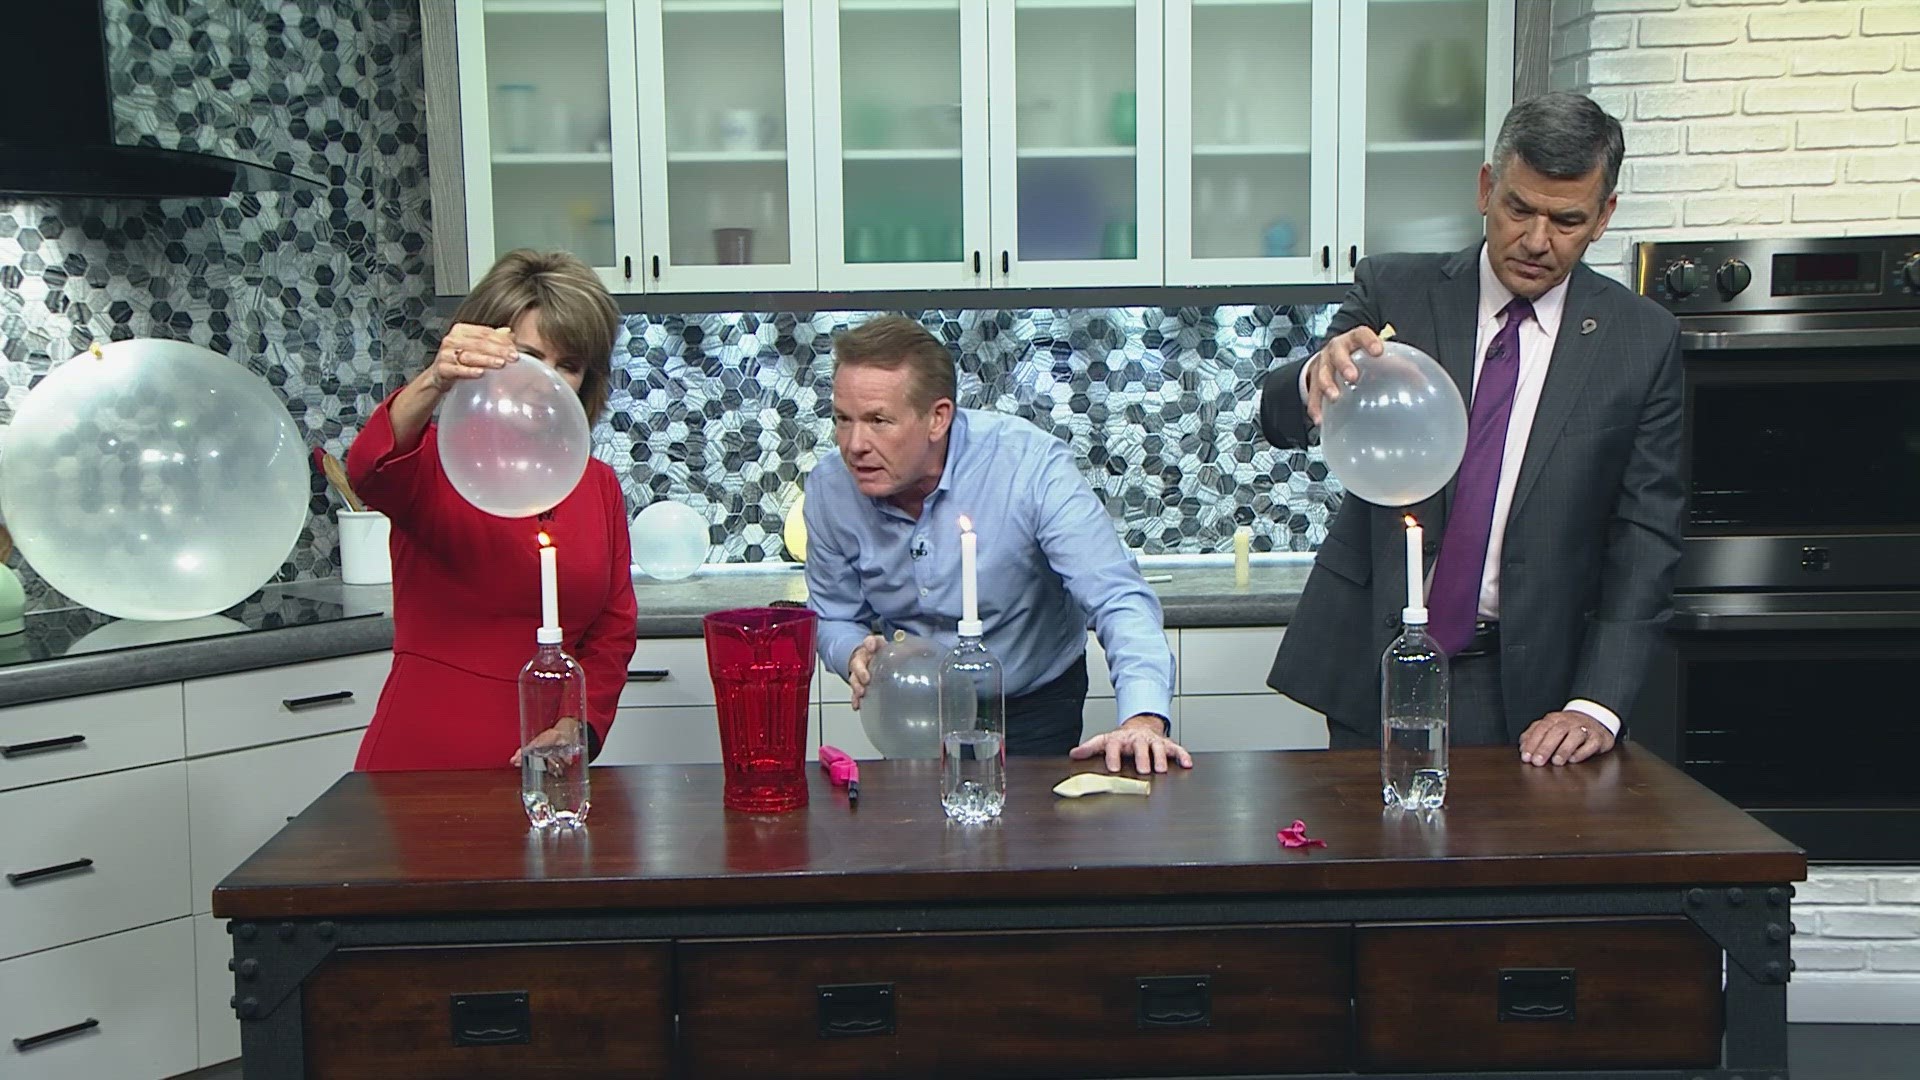 Steve Spangler has fun with candles, balloons and little bit of water.